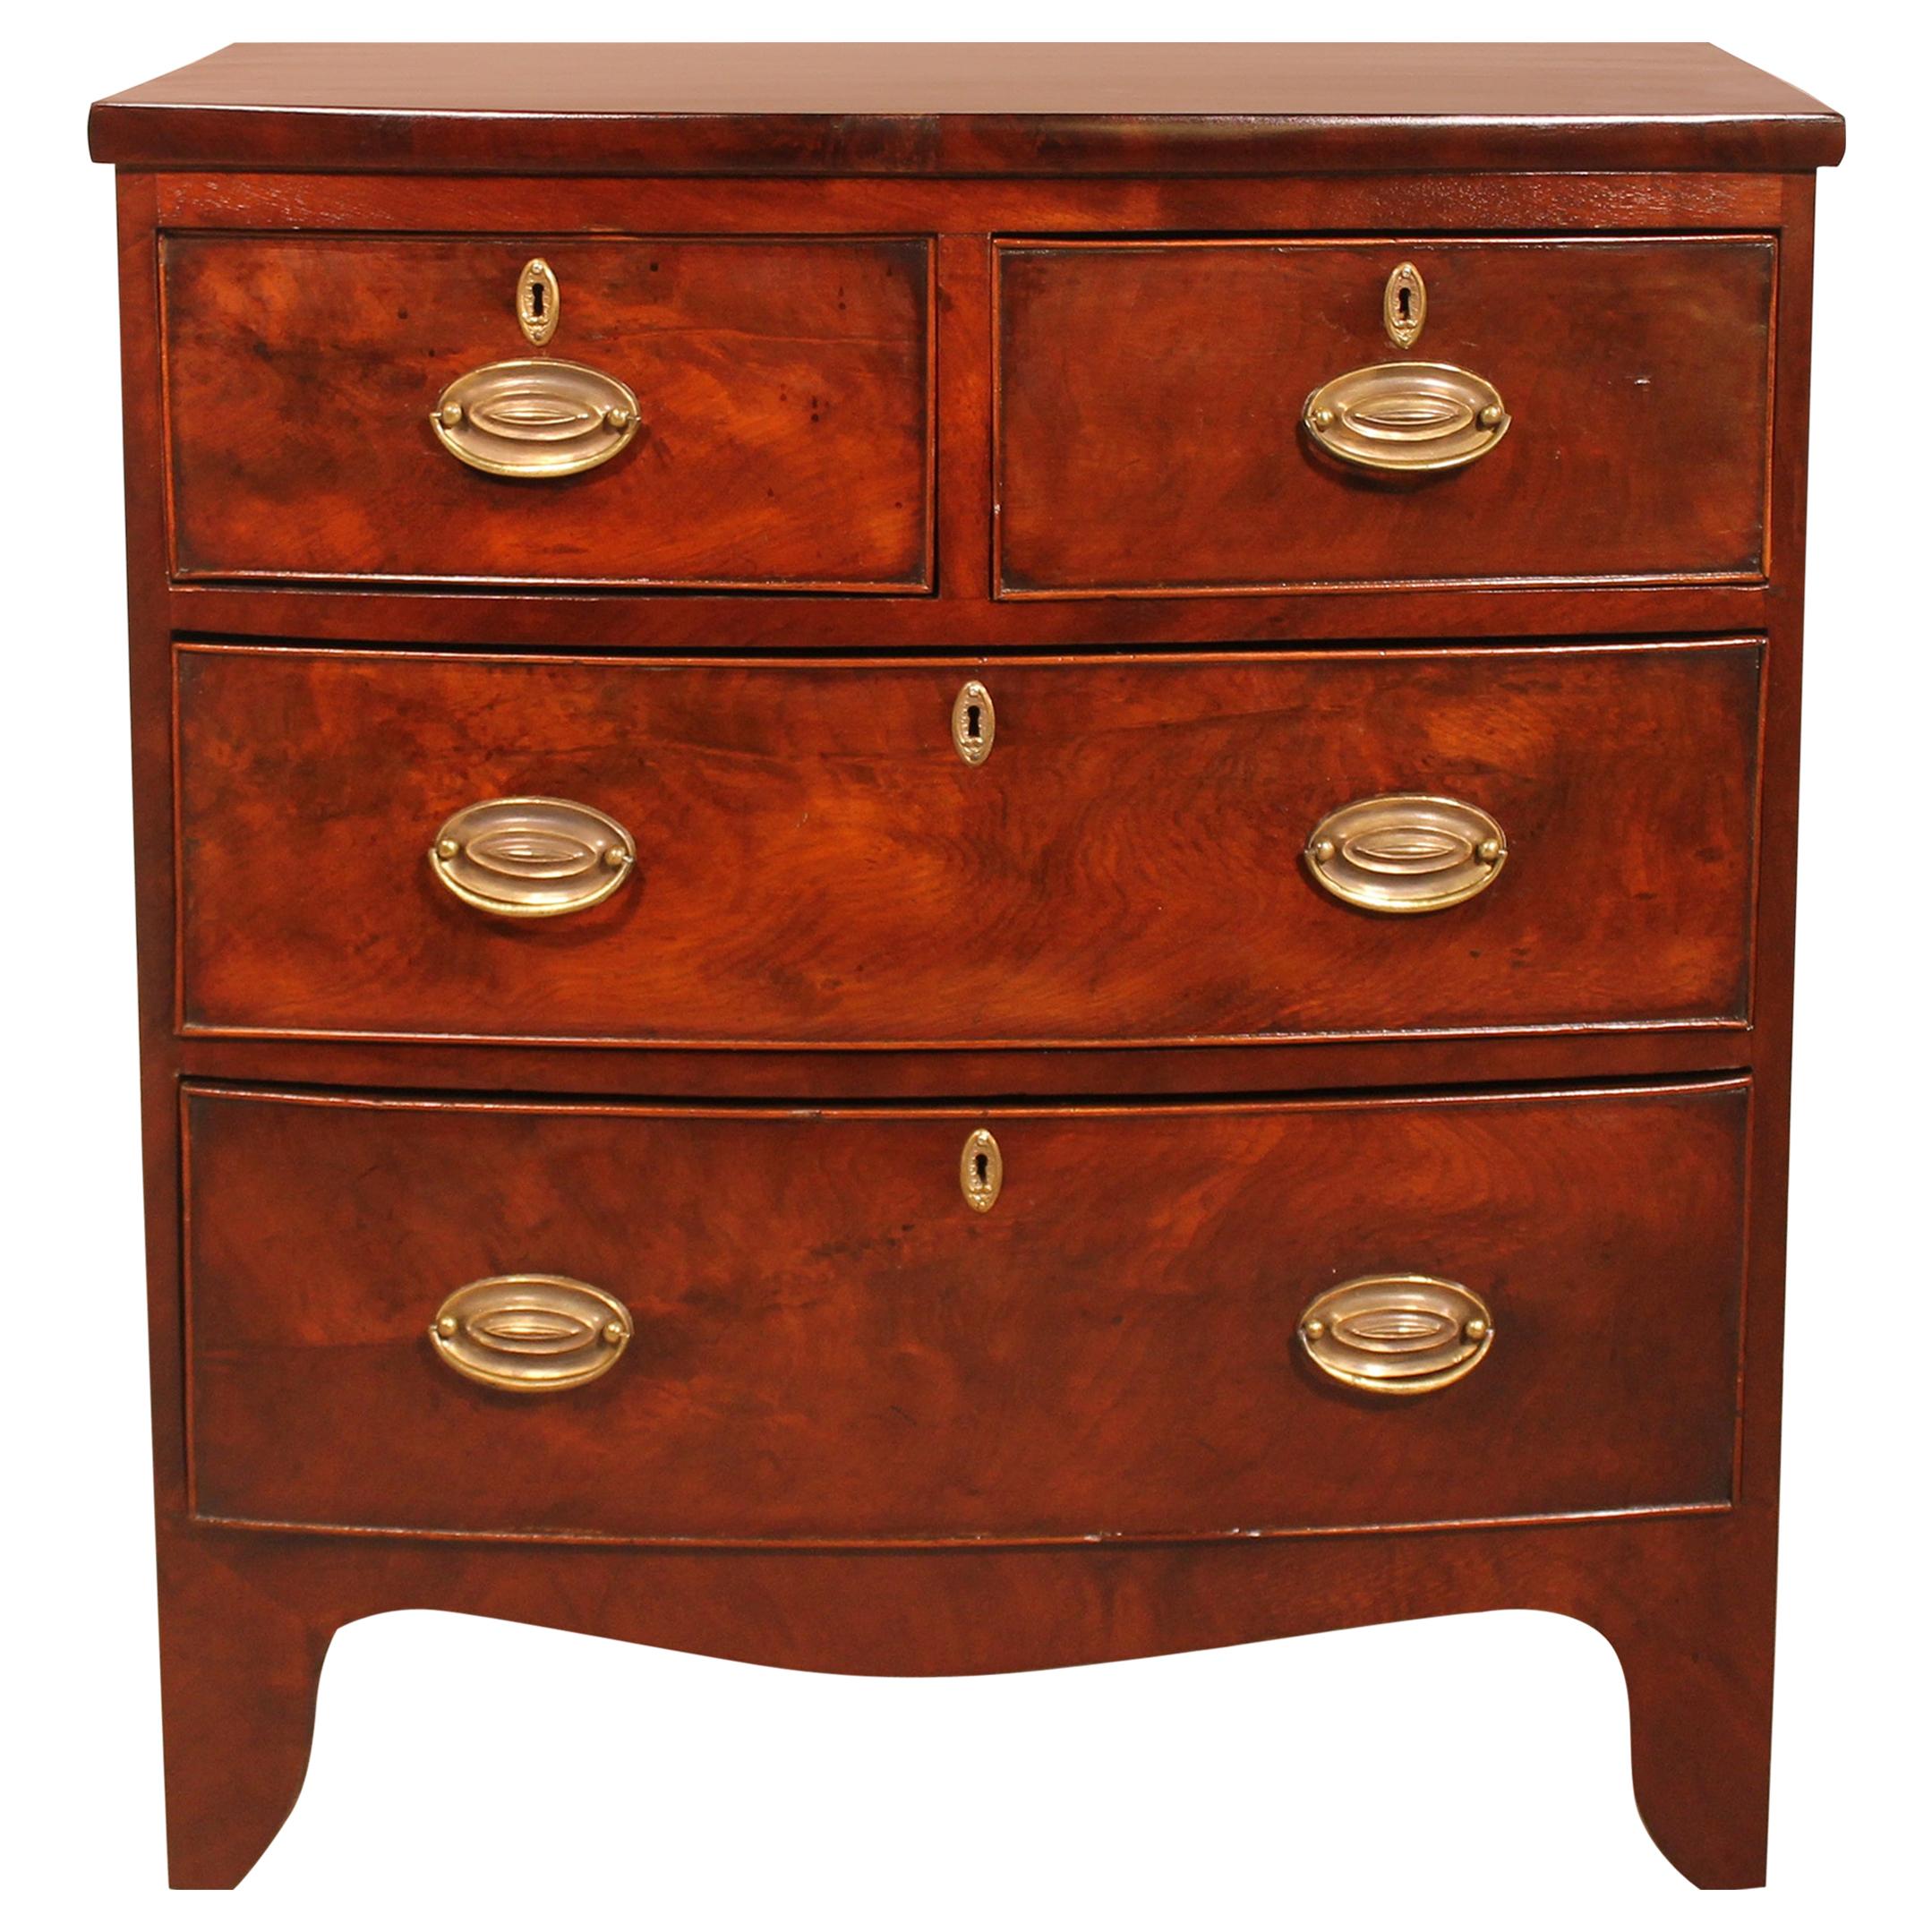 Small Bowfornt Mahogany Chest of Drawers 19th Century England